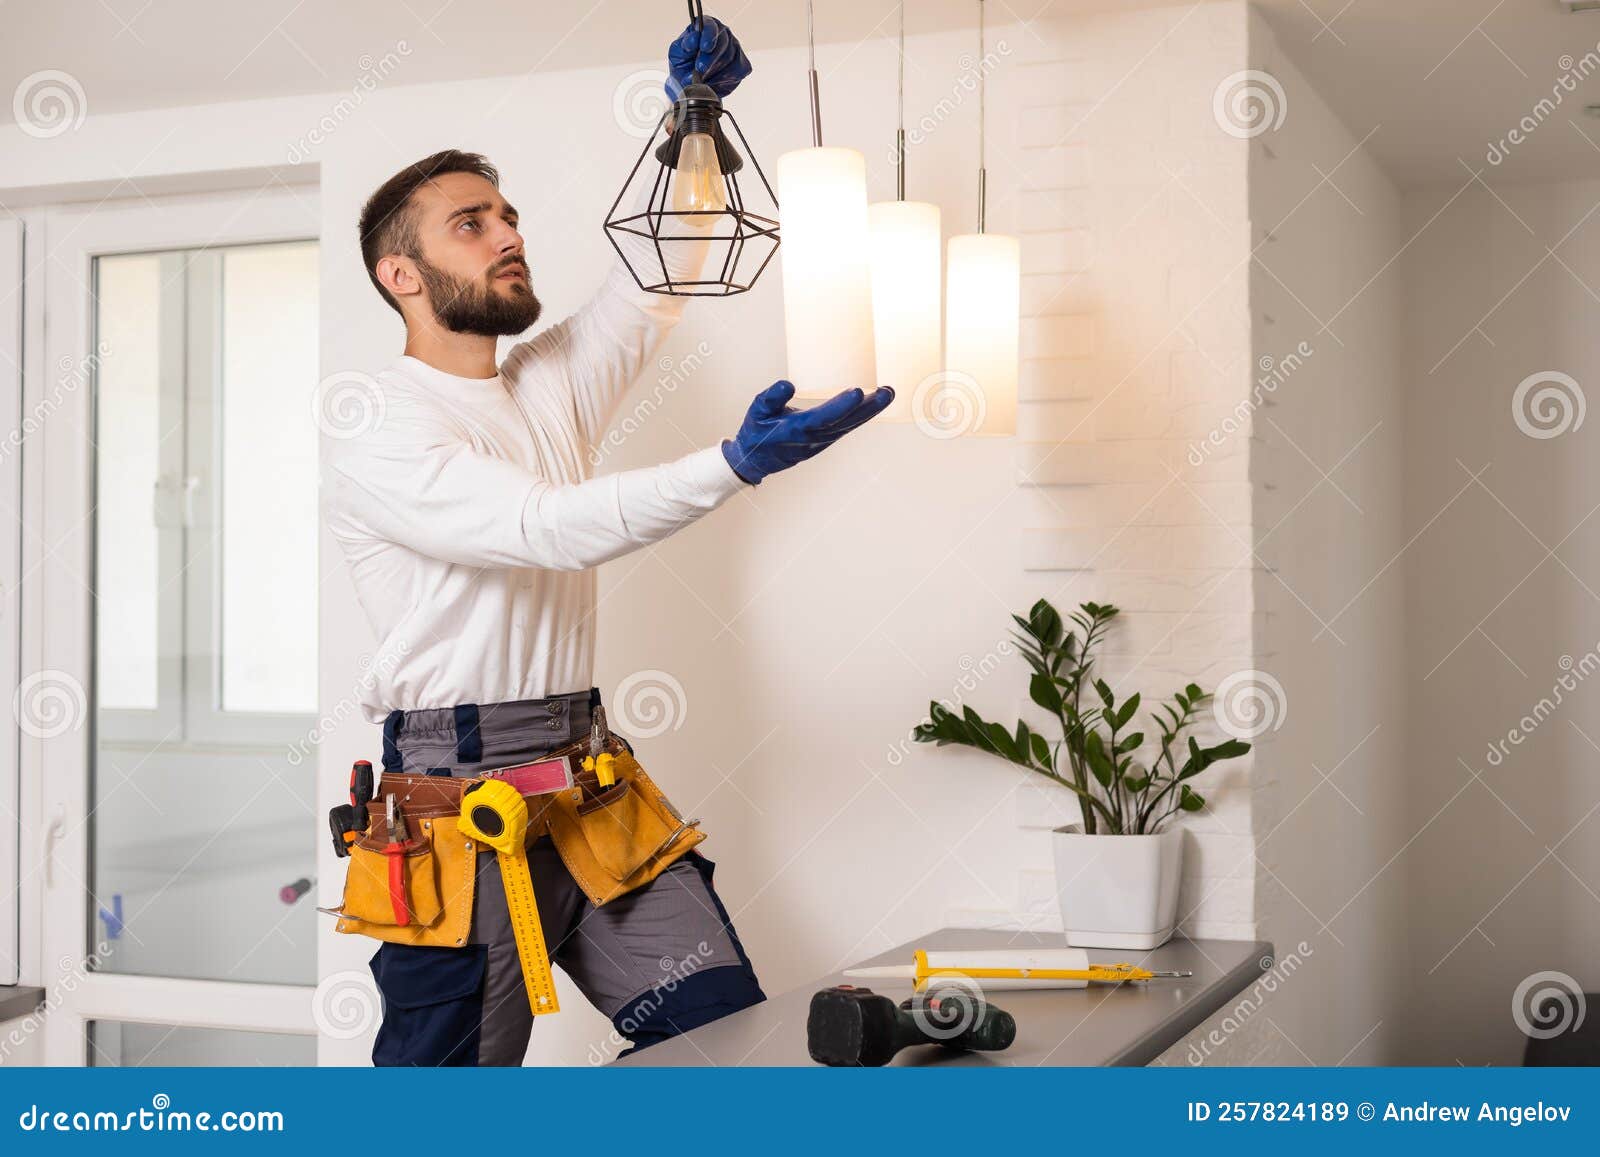 Electrician Worker Installation Electric Lamps Light Inside Apartment ...